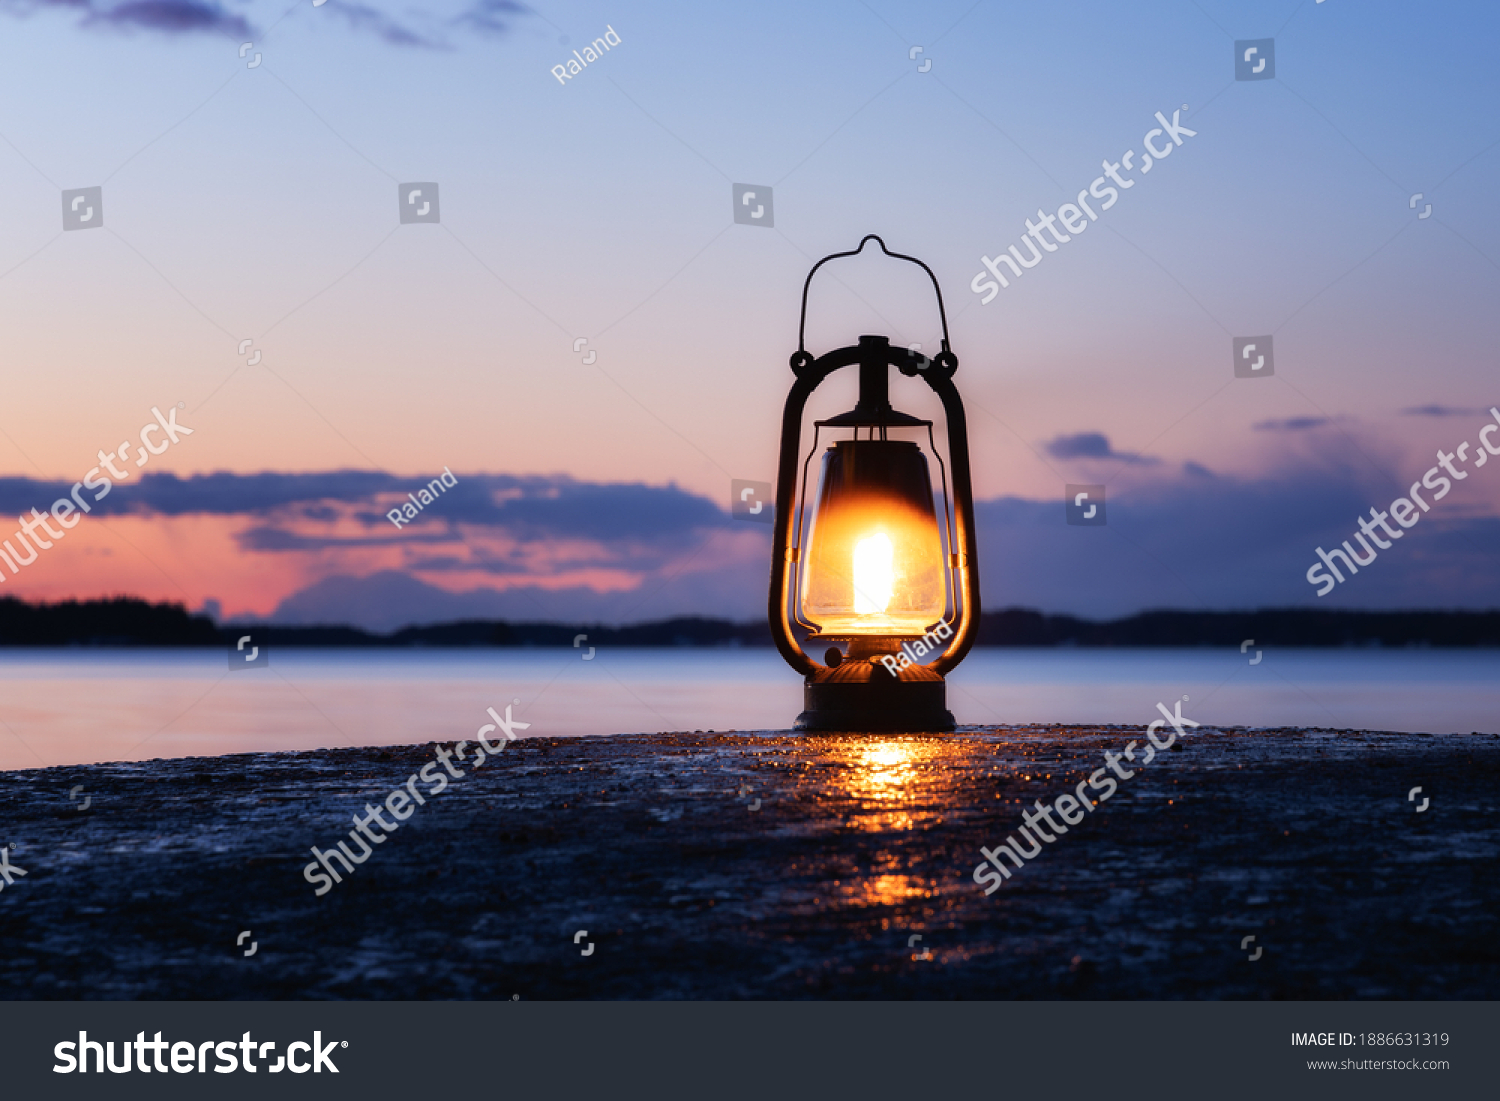 An old vintage oil lantern on a rock by the sea. Beautiful sunset sky and sea on background. Chill out travel concept. #1886631319